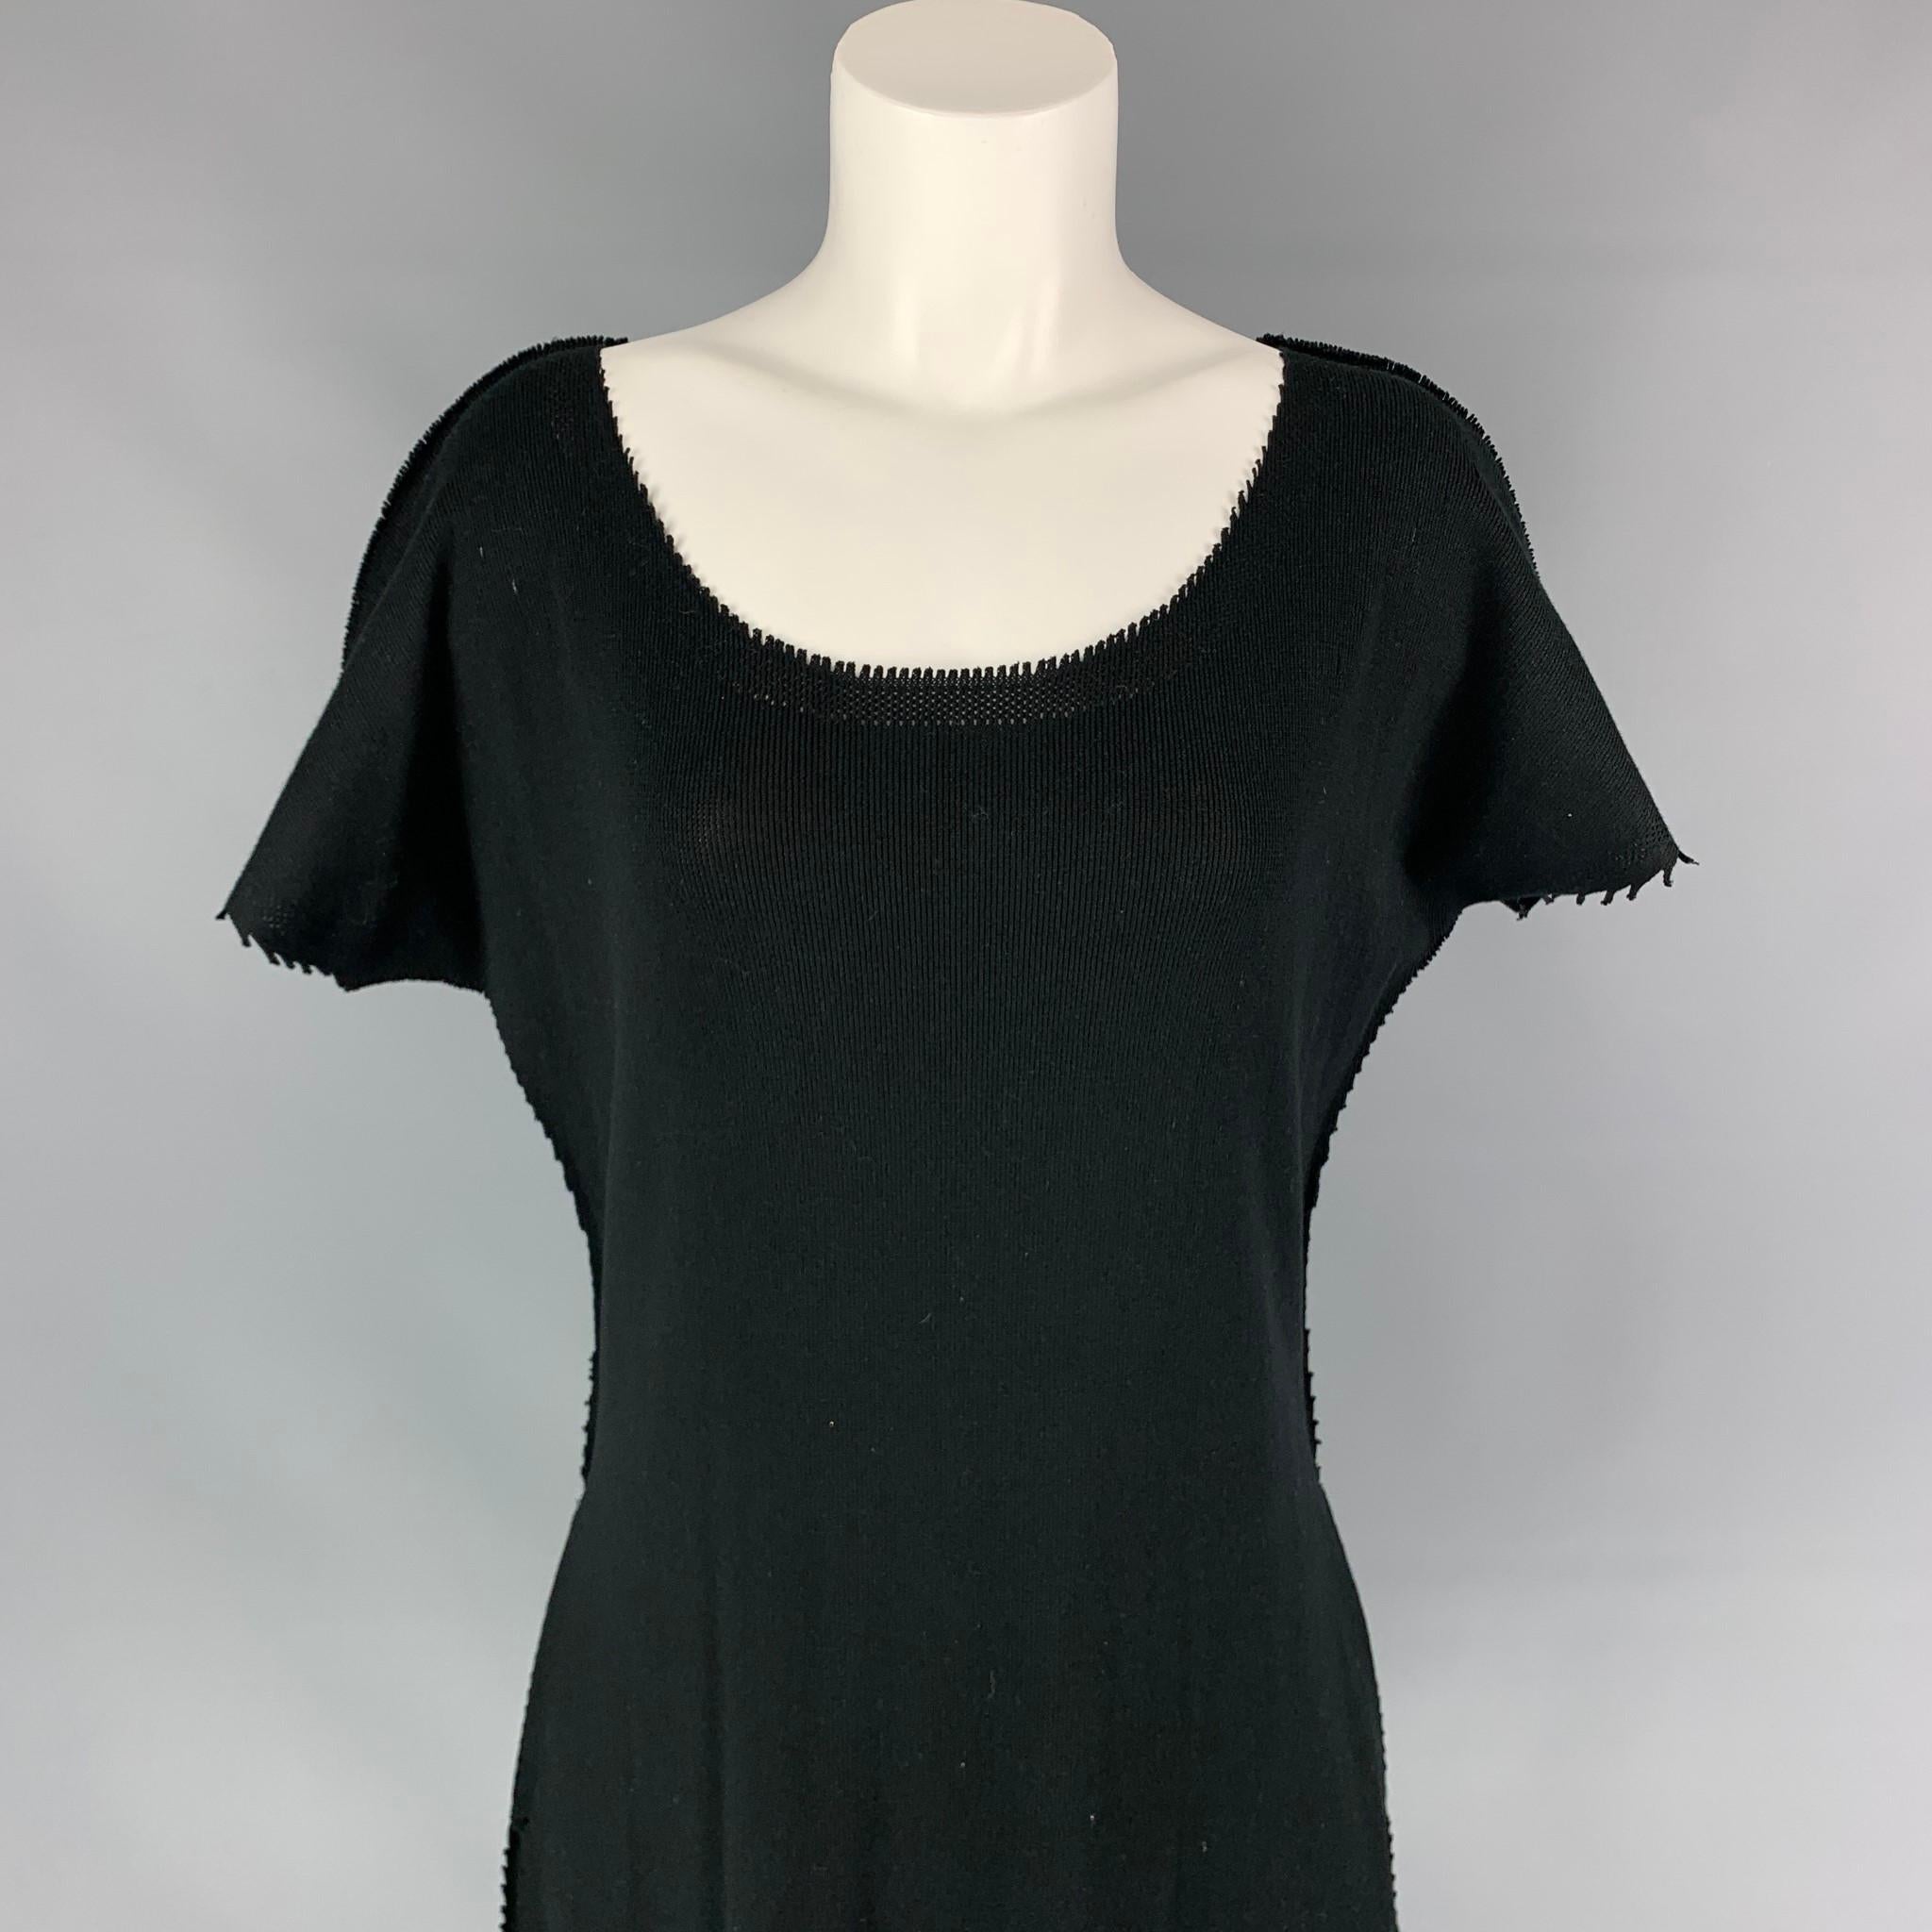 ISSEY MIYAKE dress comes in a black knitted material featuring a shift style, raw edges, slit pockets, and a loose neckline. Made in Japan.

Very Good Pre-Owned Condition.
Marked: JP 2

Measurements:

Shoulder: 18.5 in.
Bust: 48 in.
Waist: 35